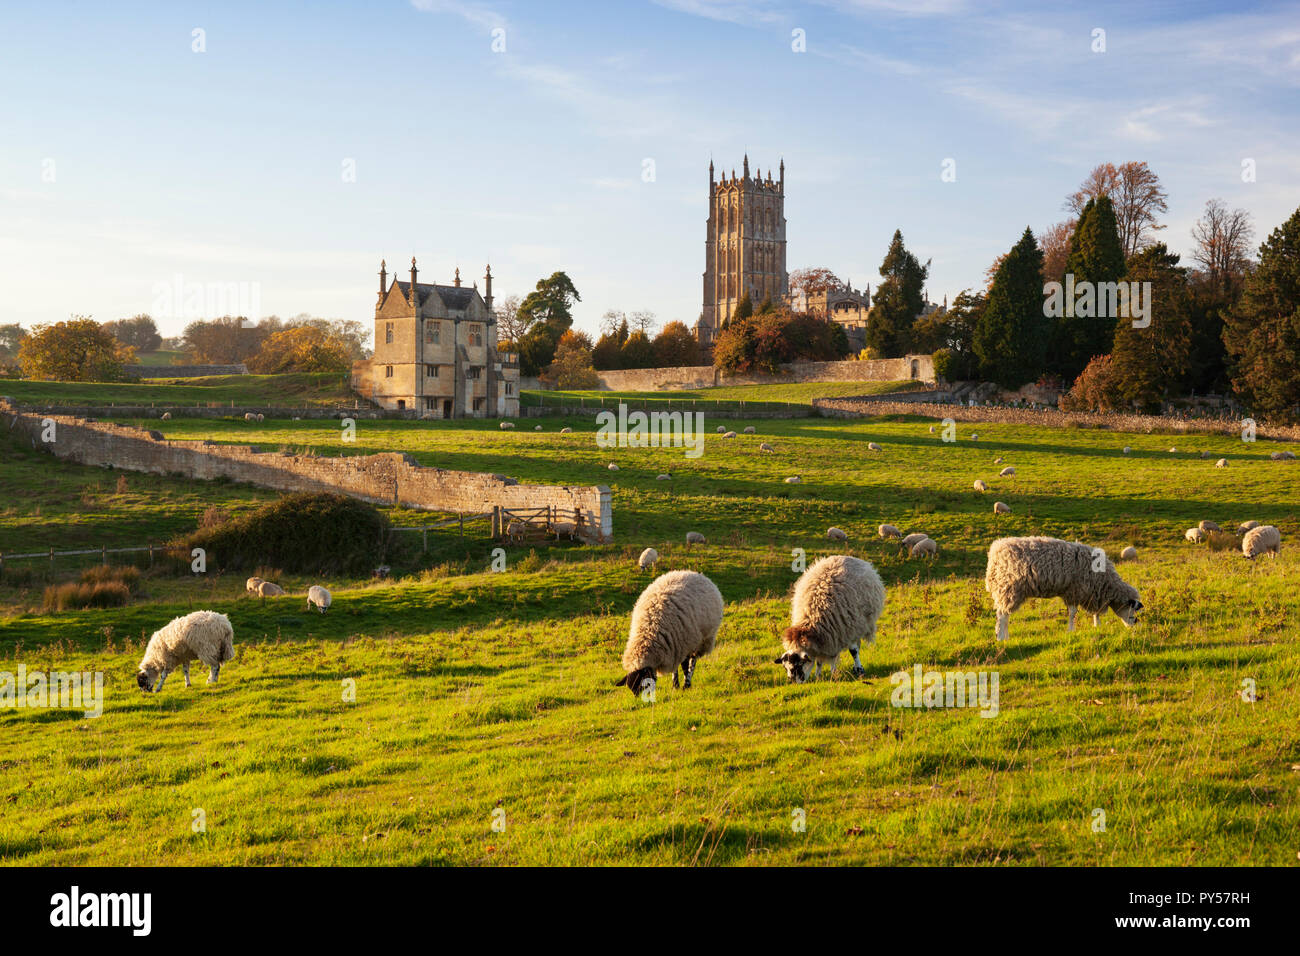 East Banqueting House of Old Campden House and St James' church in the coneygree field with grazing sheep at sunset, Chipping Campden, Cotswolds AONB Stock Photo